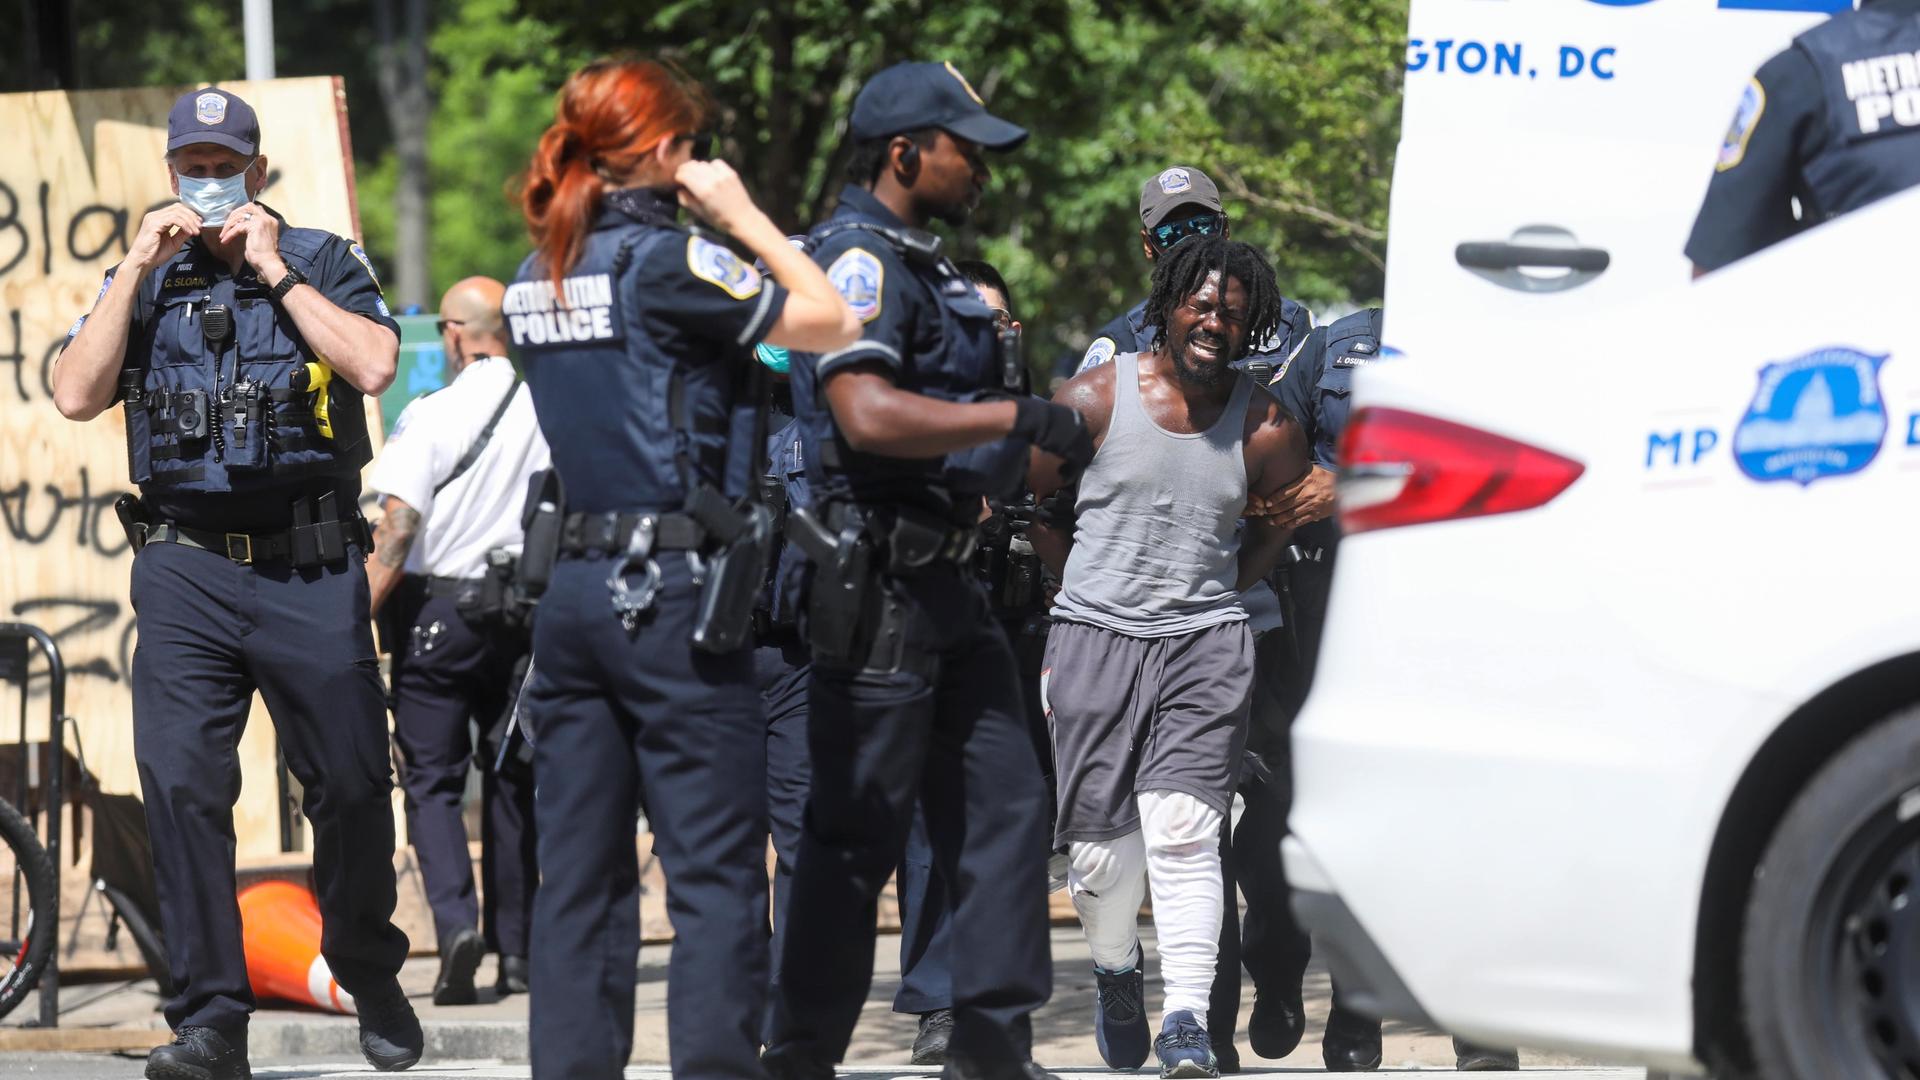 A group of police officers in black uniforms detain a Black man wearing gray pants and white tank.